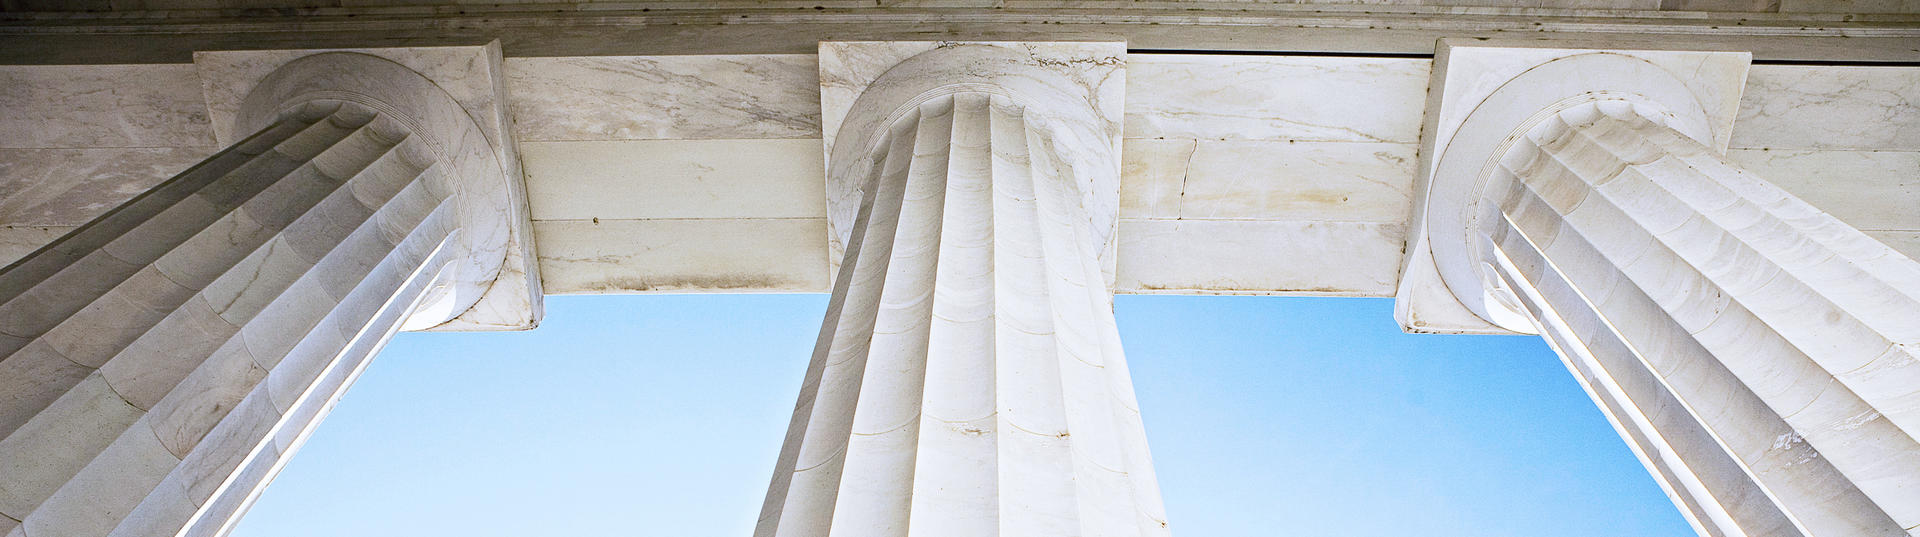 view from the ground looking up at three large marble pillars